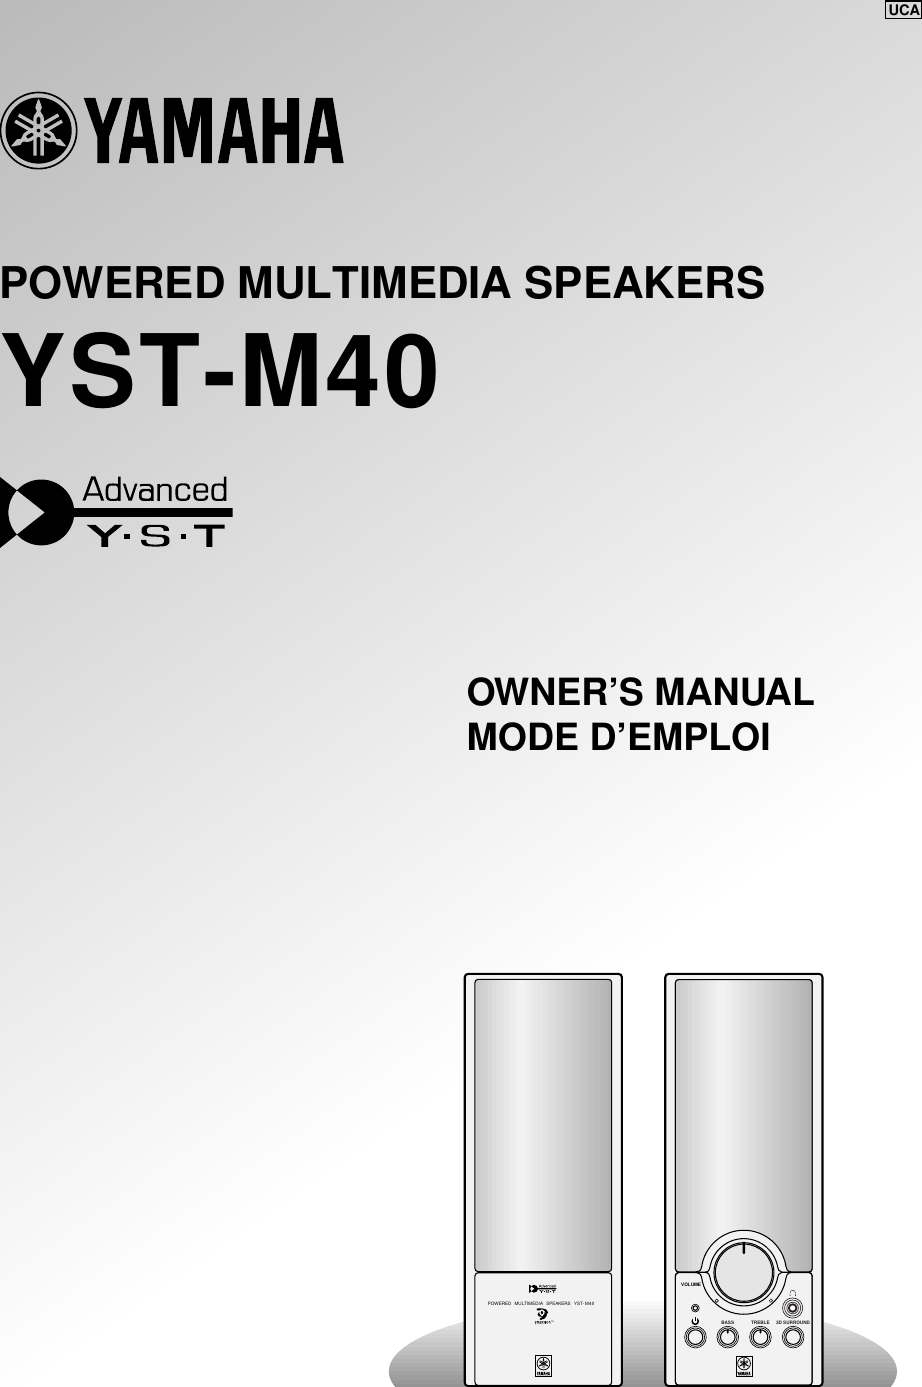 Page 1 of 9 - Yamaha YST-M40_EF YST-M40 OWNER'S MANUAL